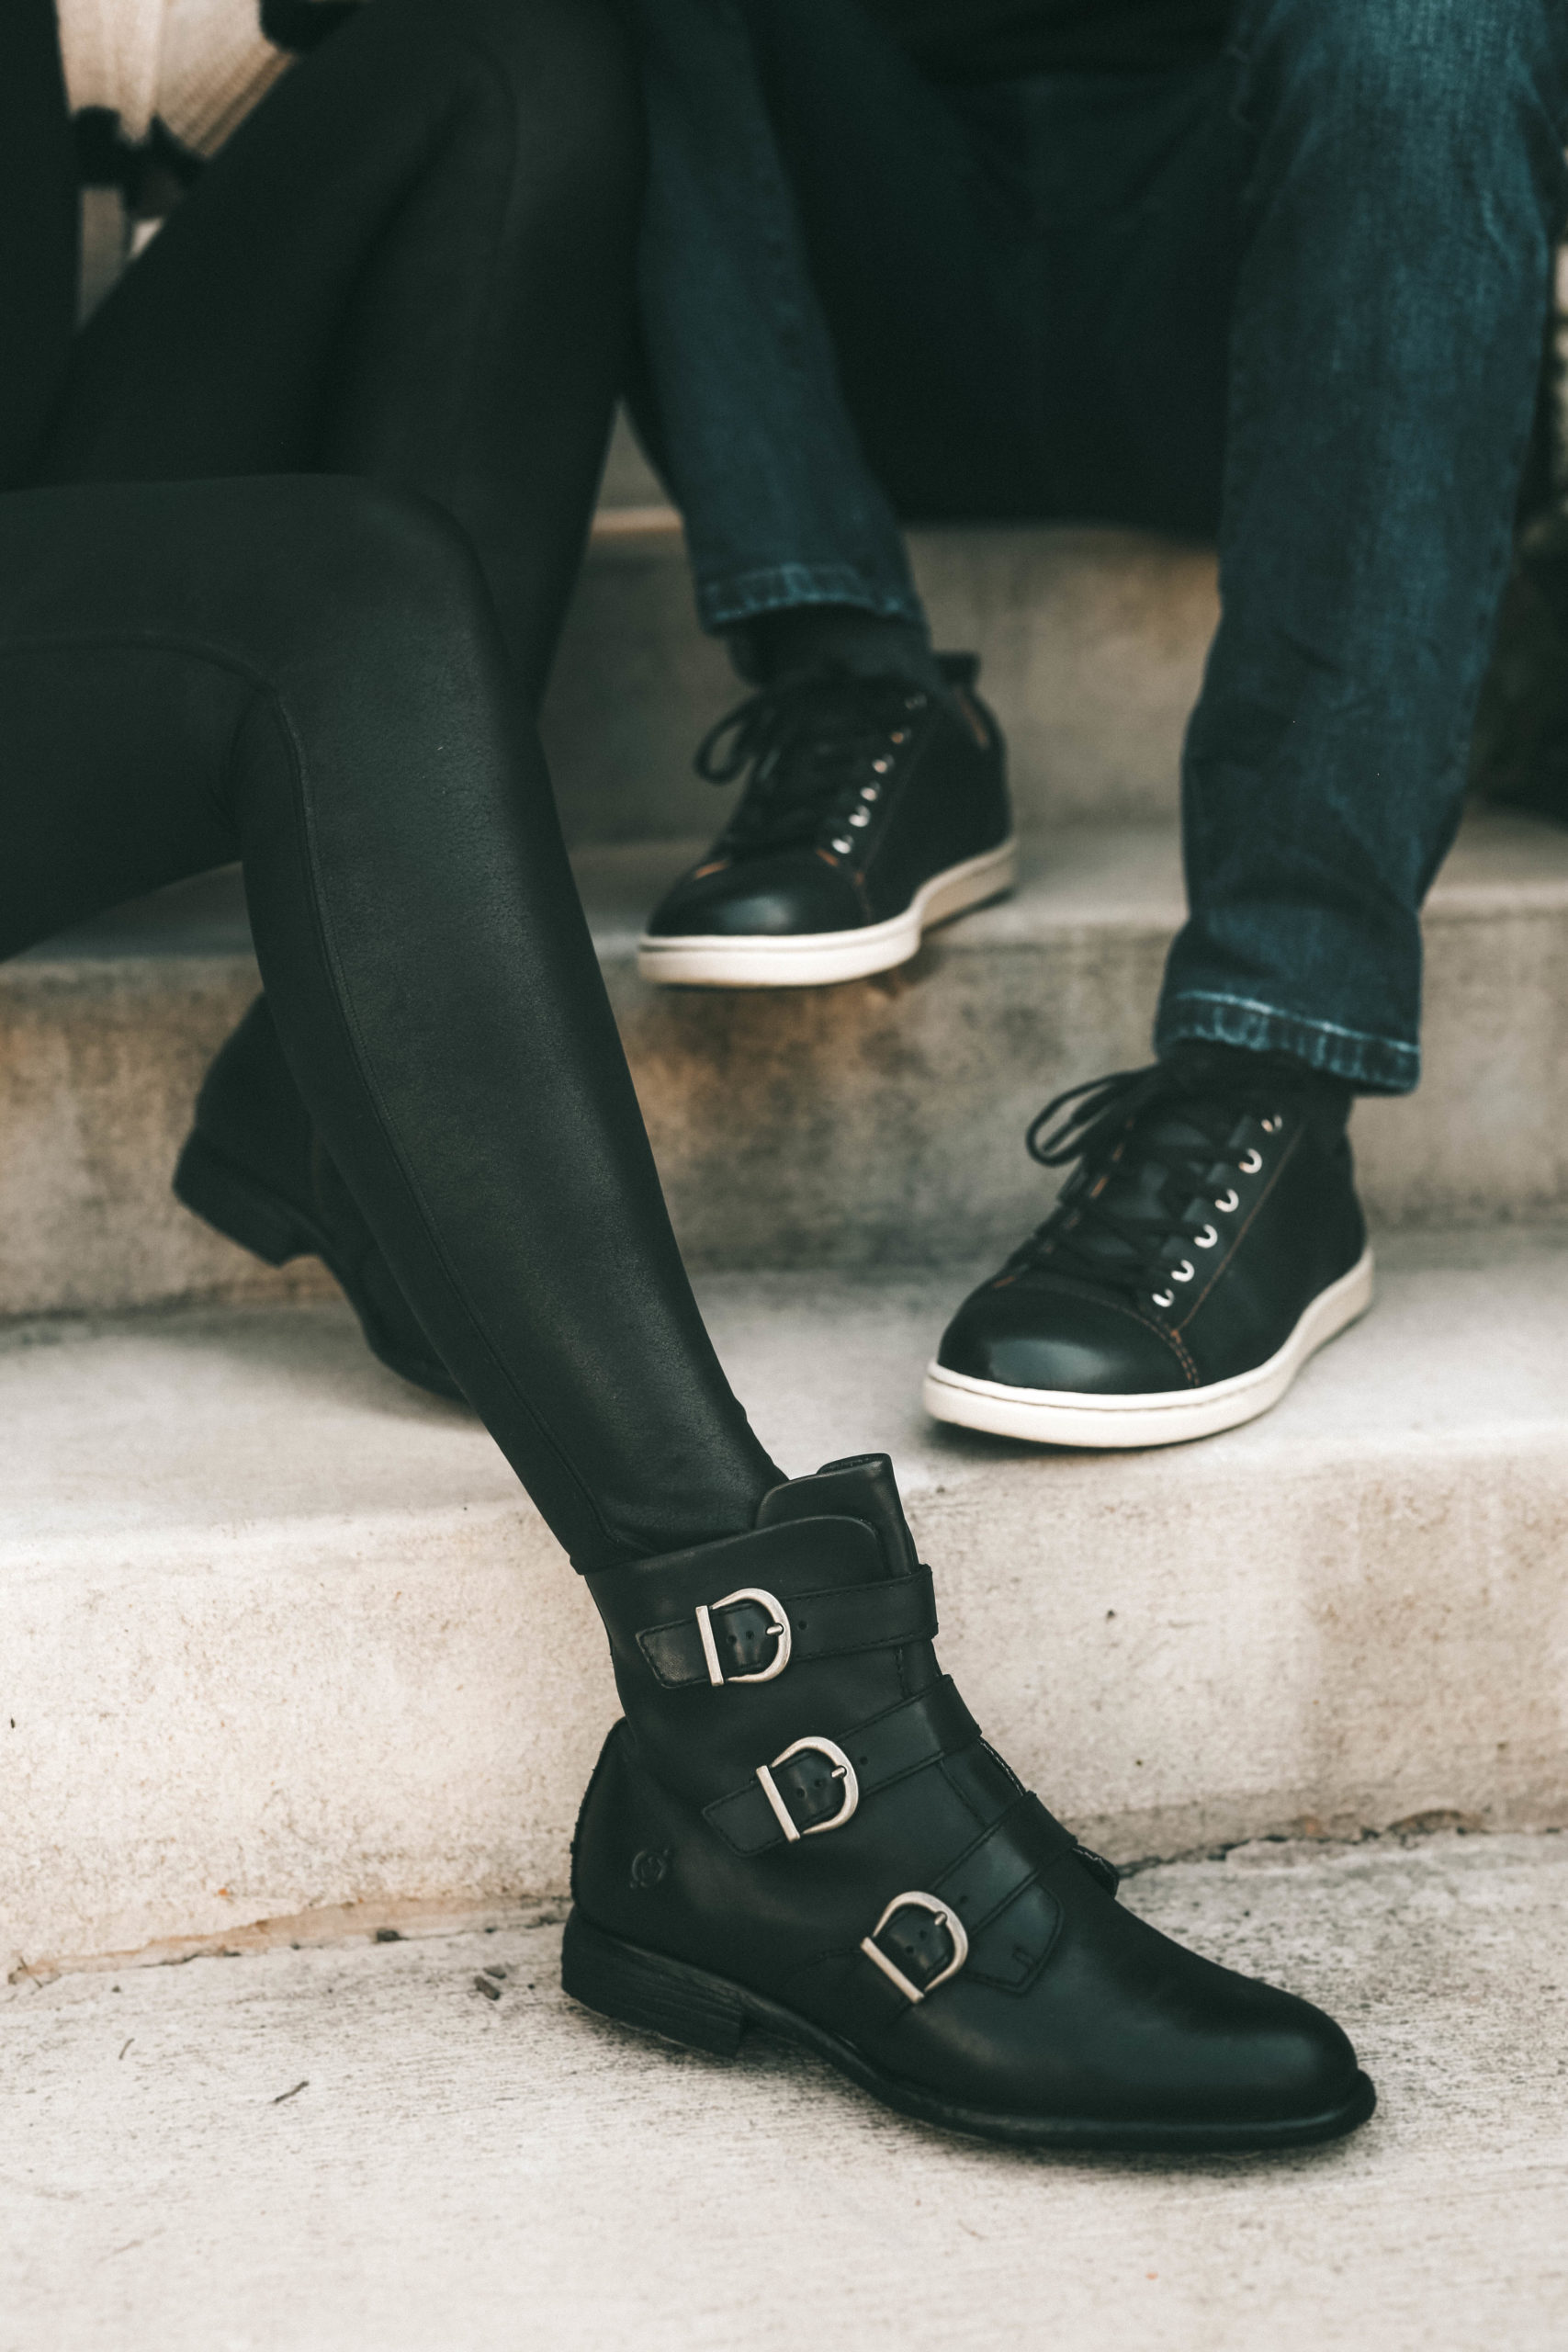 Must Have Cute Fall Shoes for Him & Her by popular Austin fashion blog, Dressed to Kill: image of a man and woman wearing Zappos Born Nivine ankle boots and Zappos Born Allegheny sneakers.